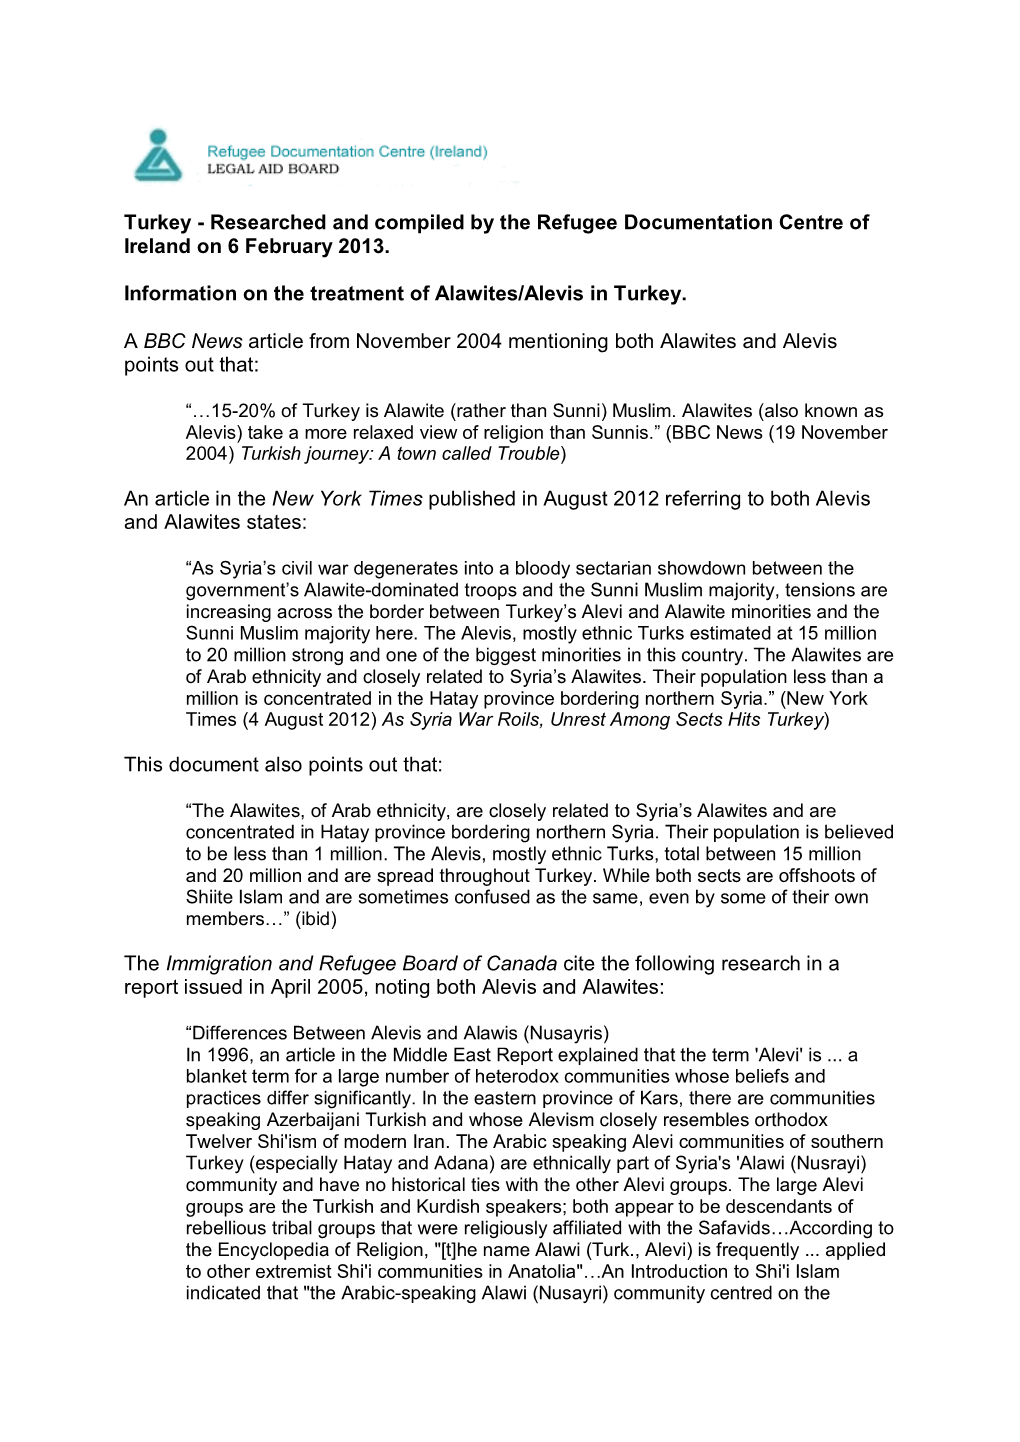 Turkey - Researched and Compiled by the Refugee Documentation Centre of Ireland on 6 February 2013